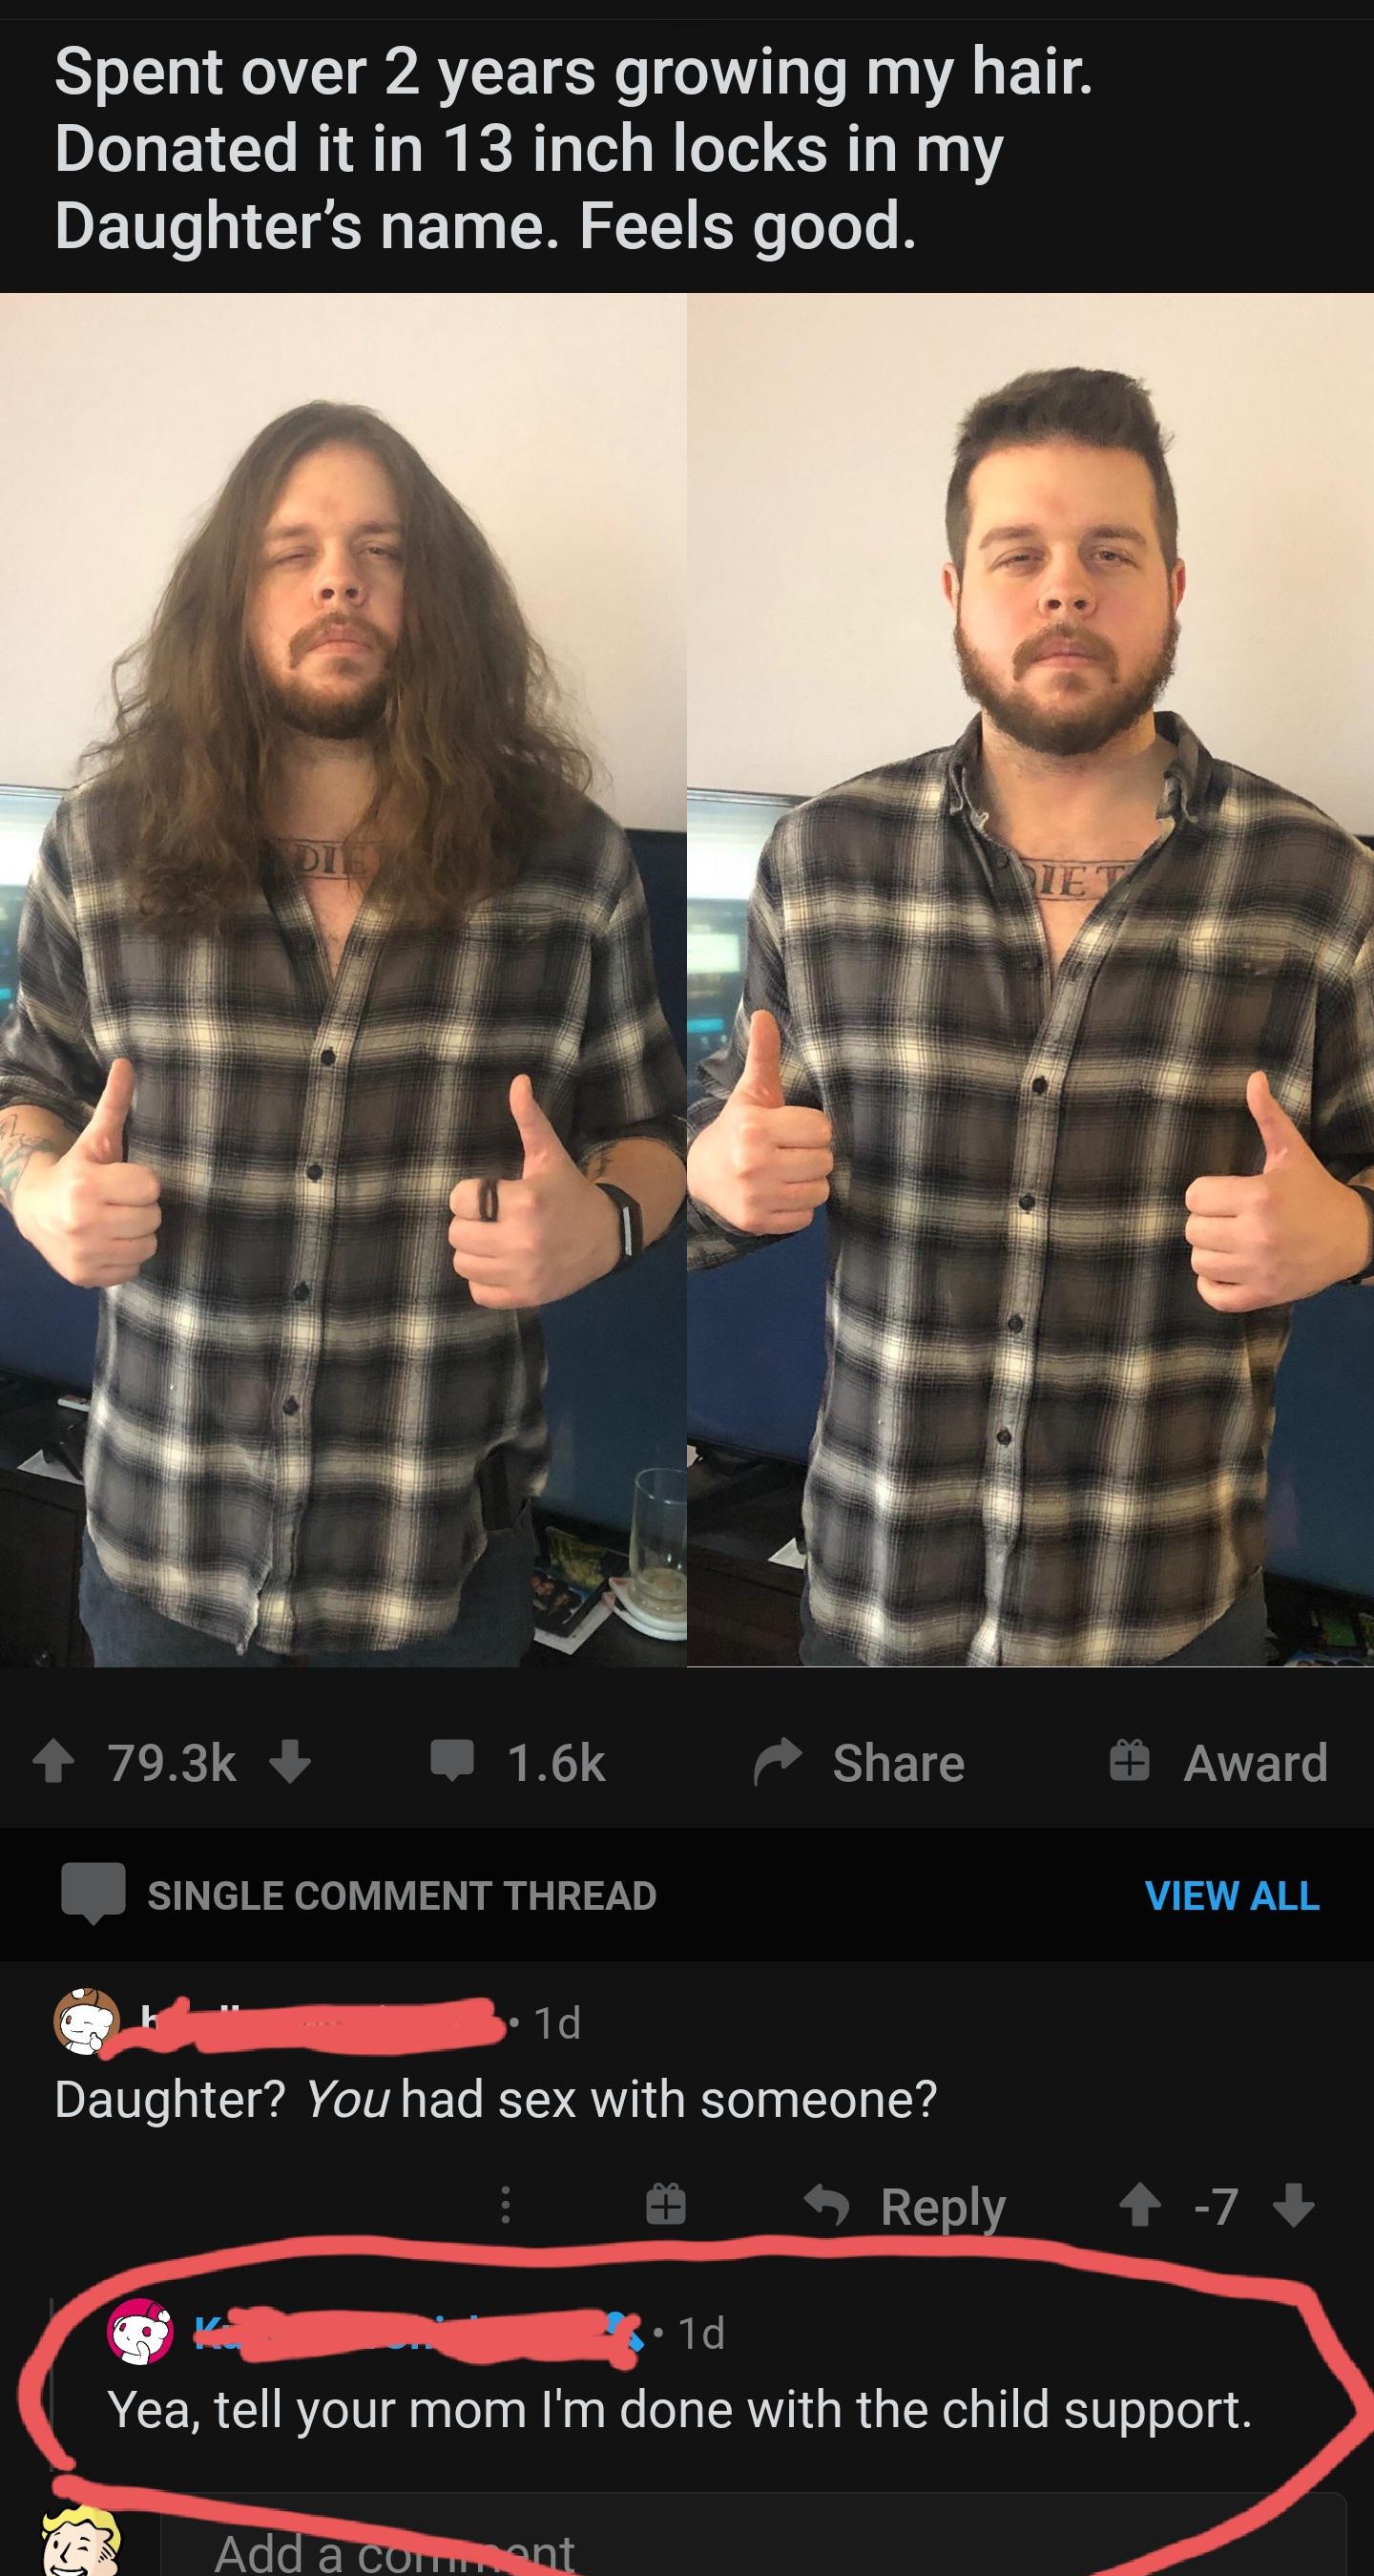 beard - Spent over 2 years growing my hair. Donated it in 13 inch locks in my Daughter's name. Feels good. Award Single Comment Thread View All Td Daughter? You had sex with someone? Yea, tell your mom I'm done with the child support. Add a com